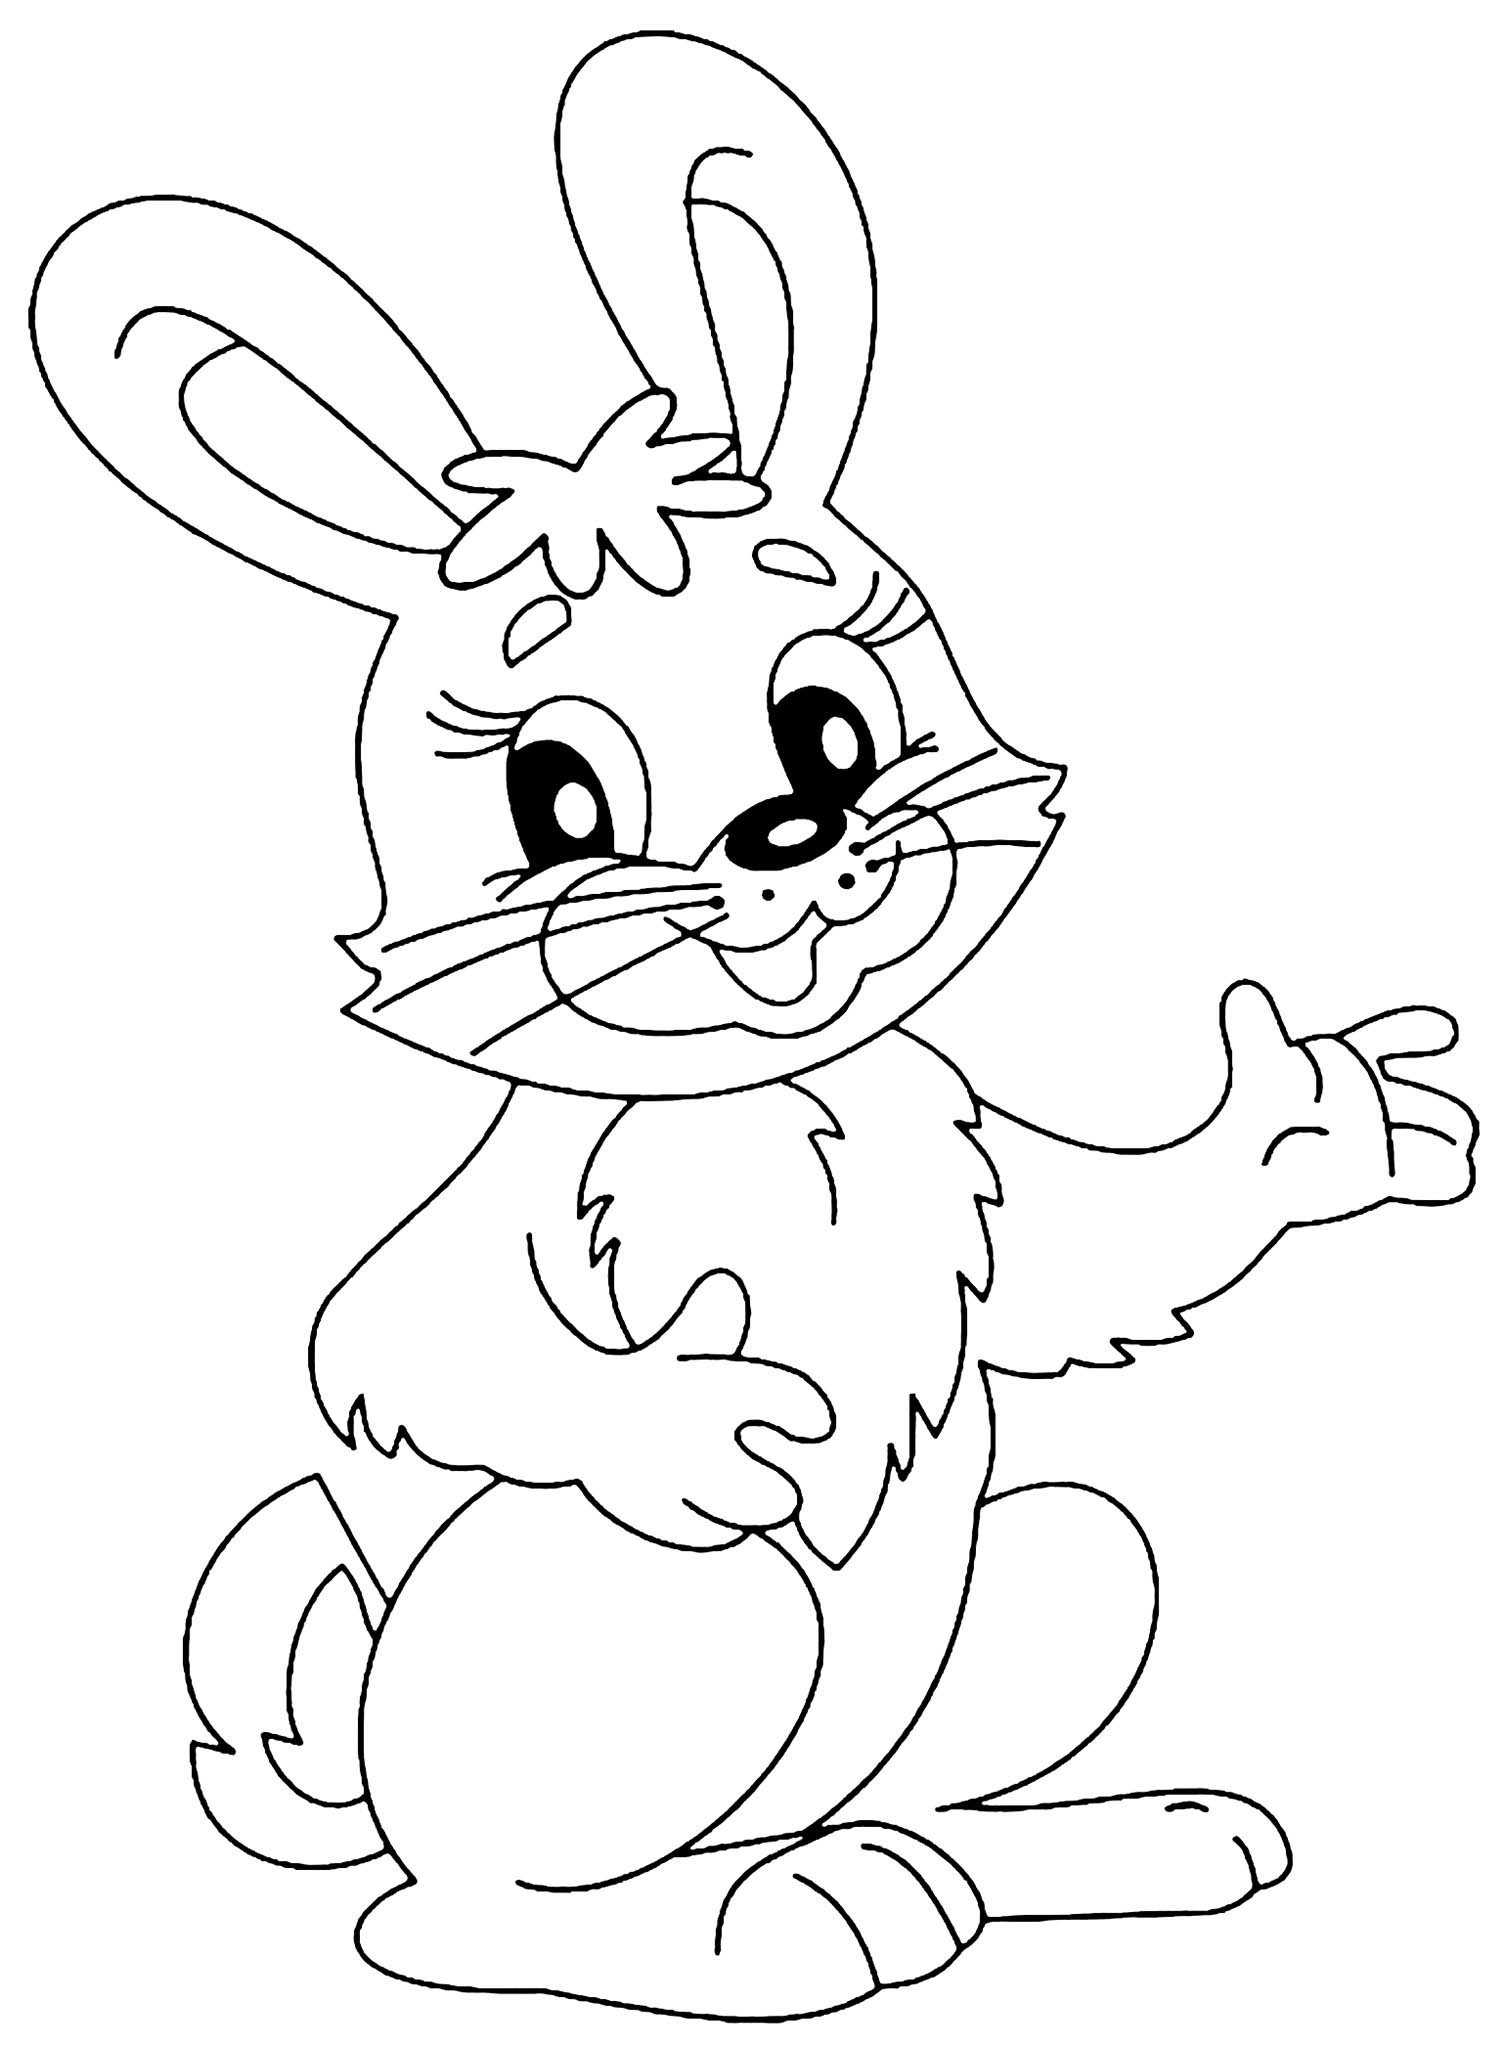 bunny rabbit drawing in color